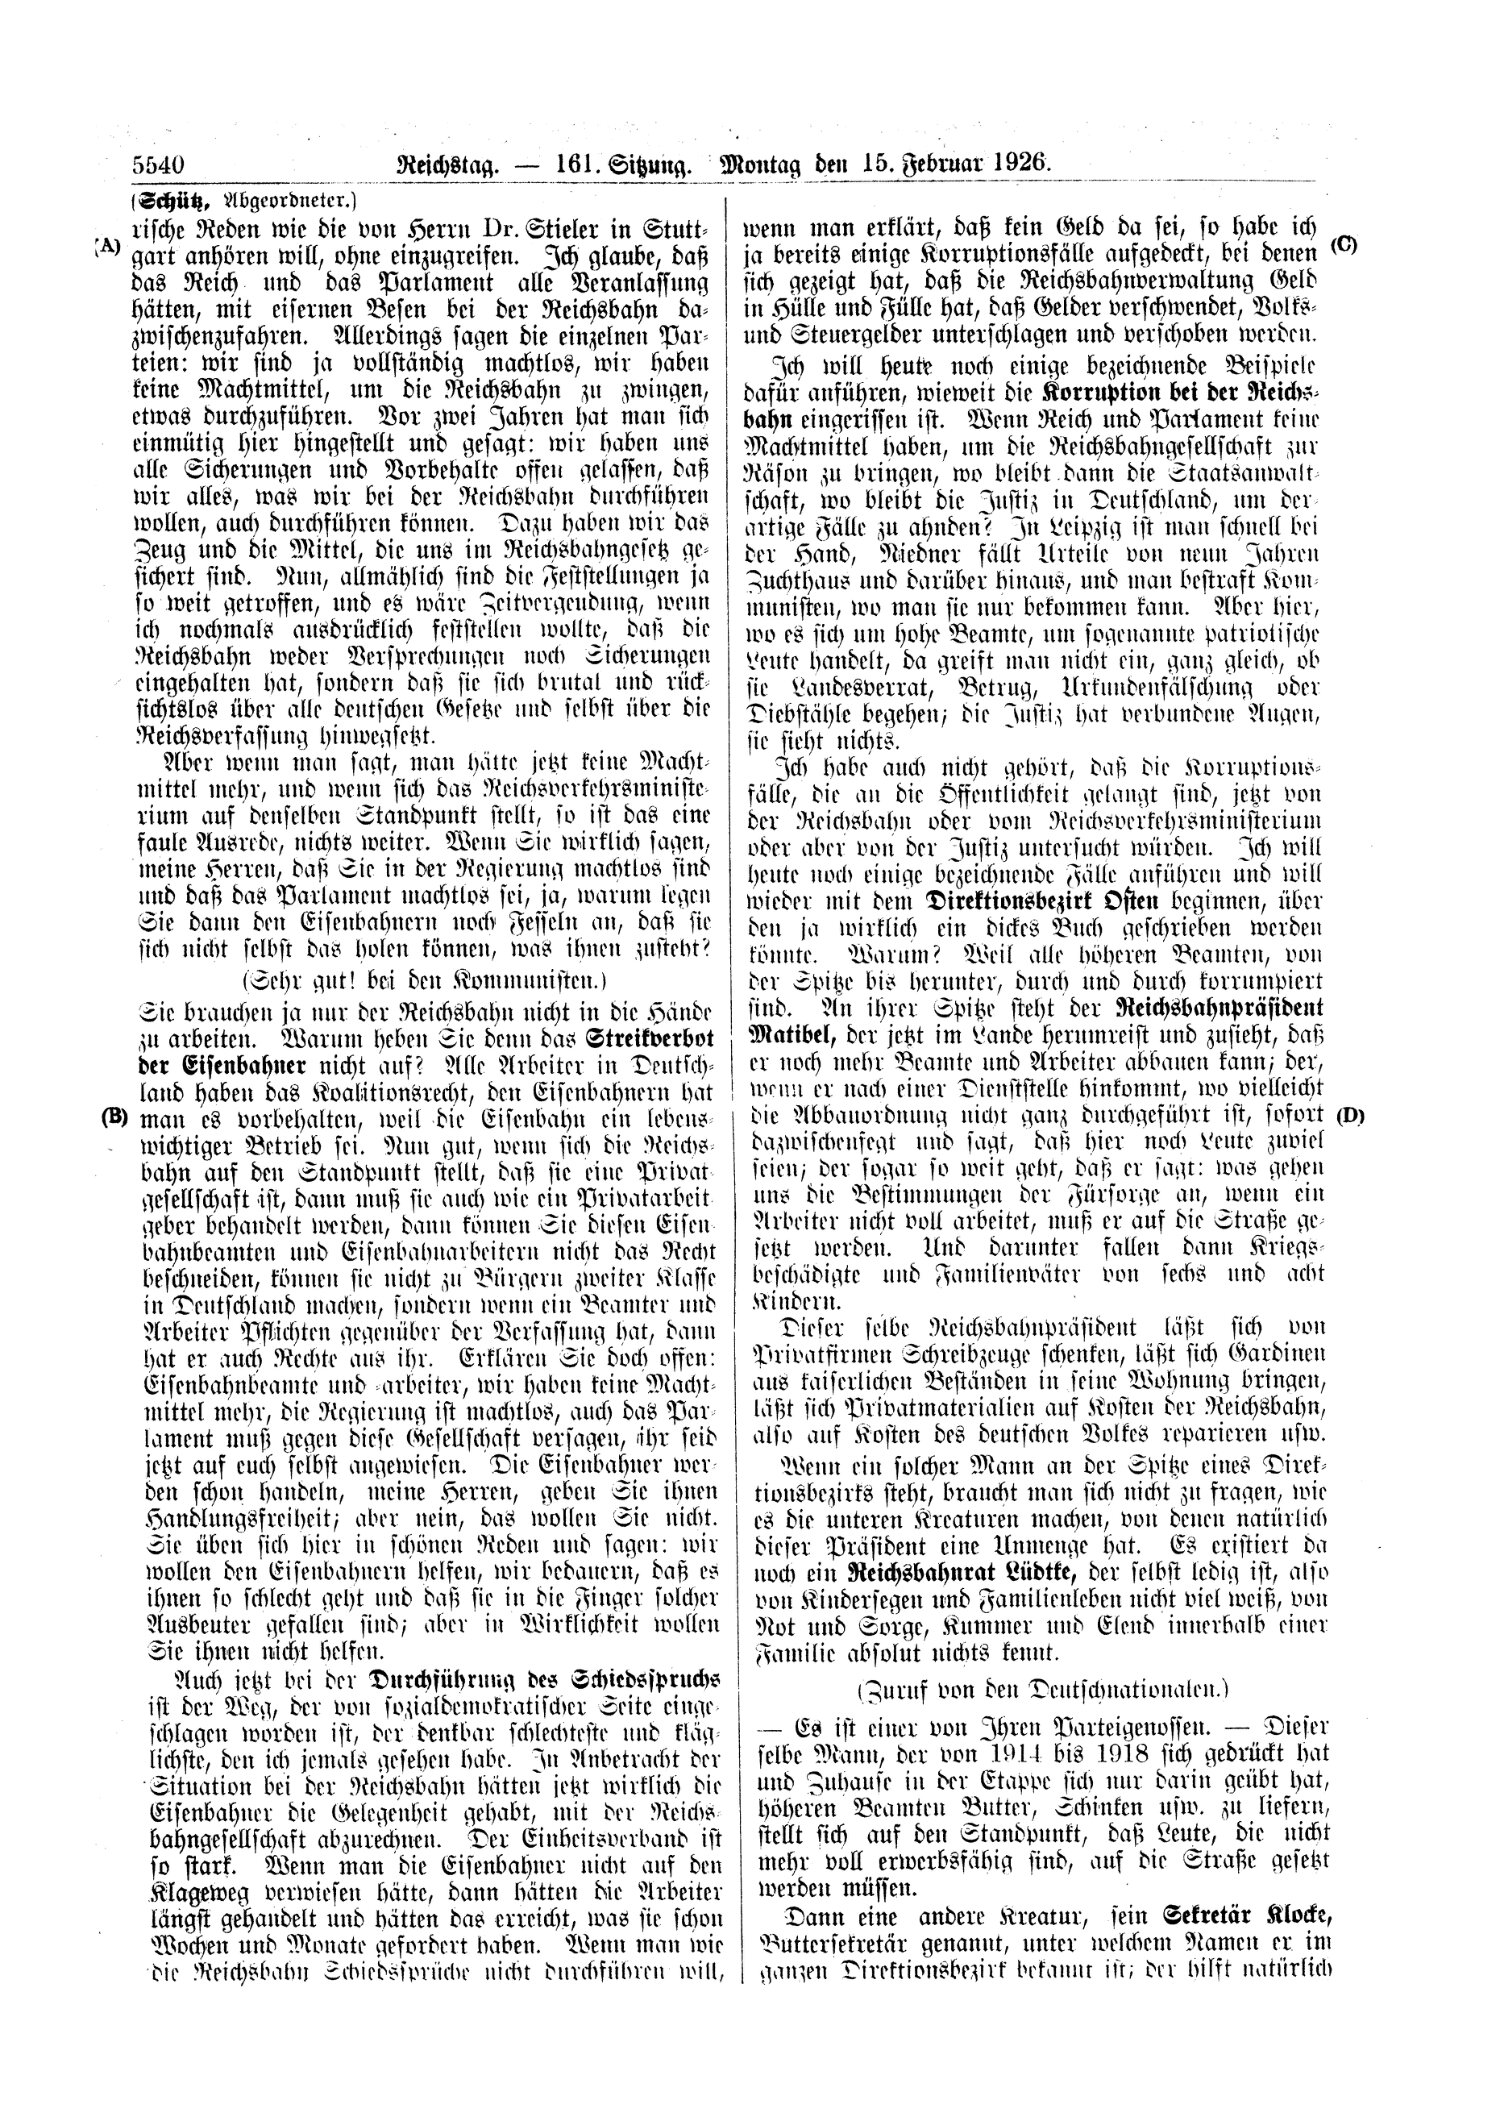 Scan of page 5540